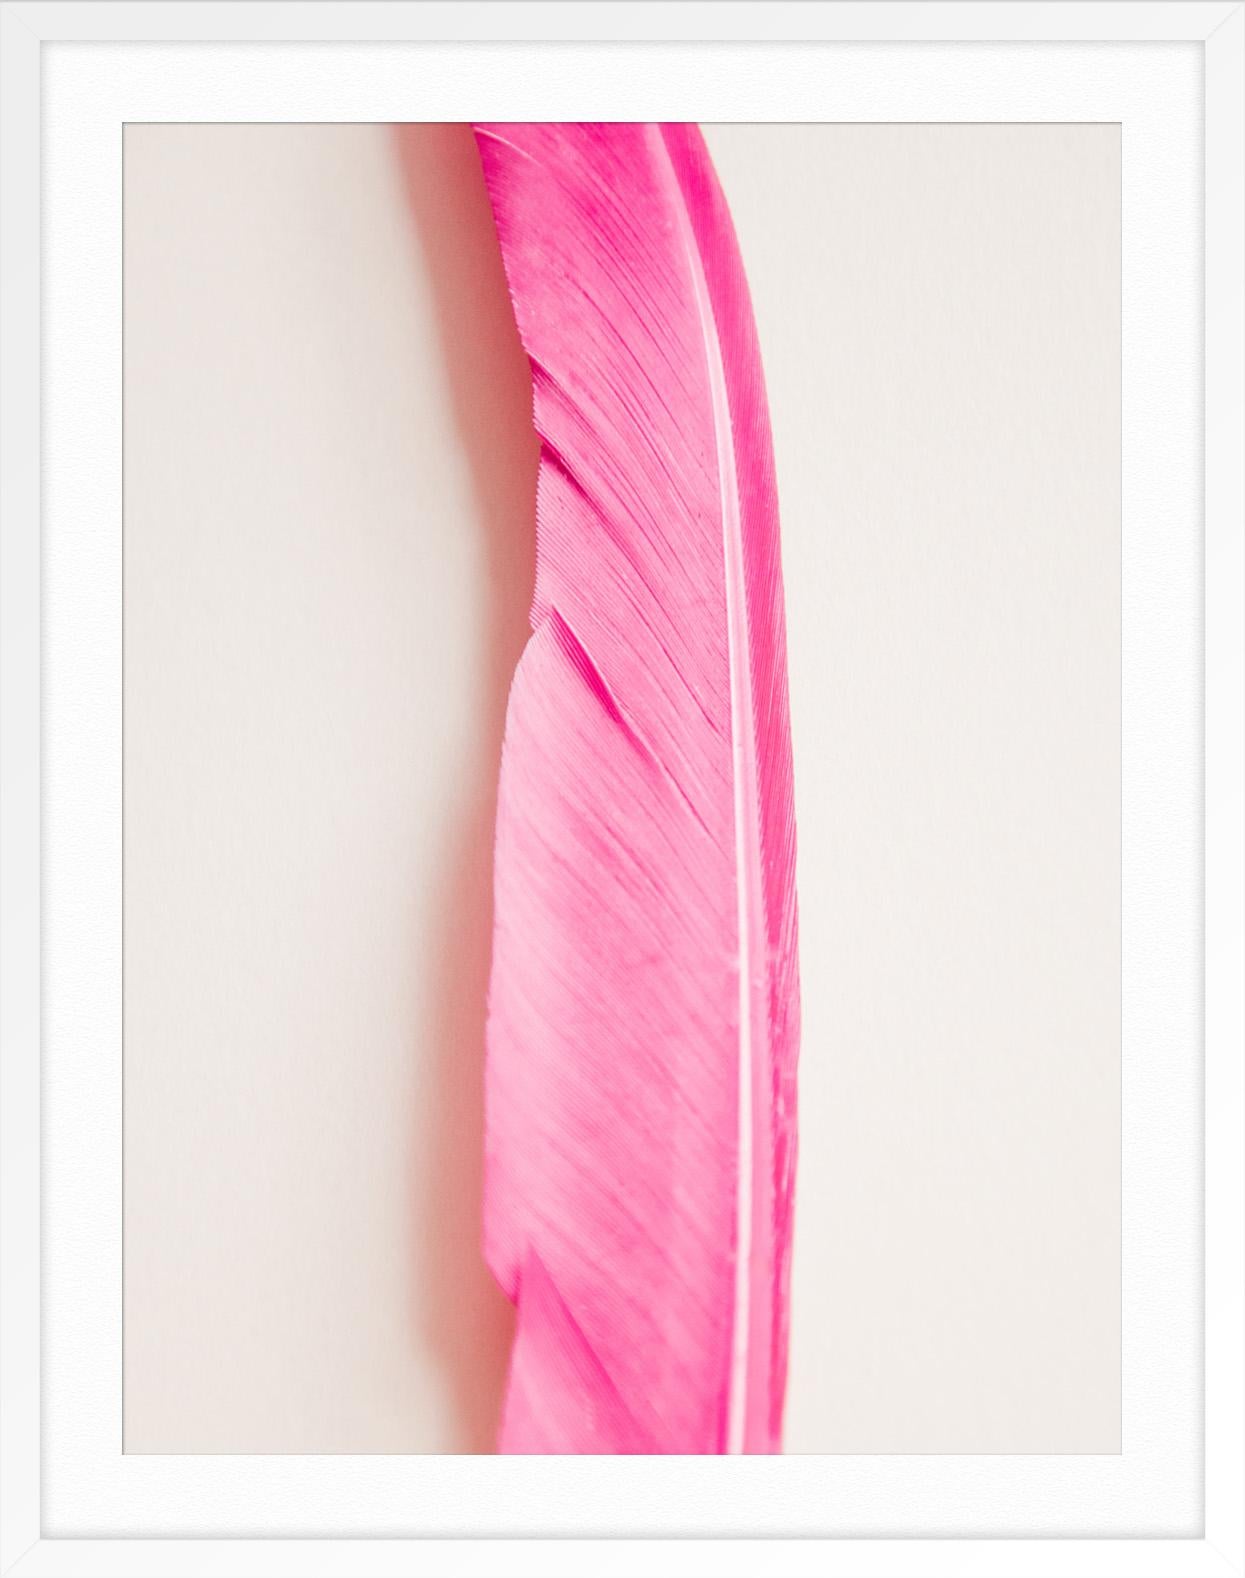 Feather or Not 4 - Pink Abstract Print by Maria Piessis